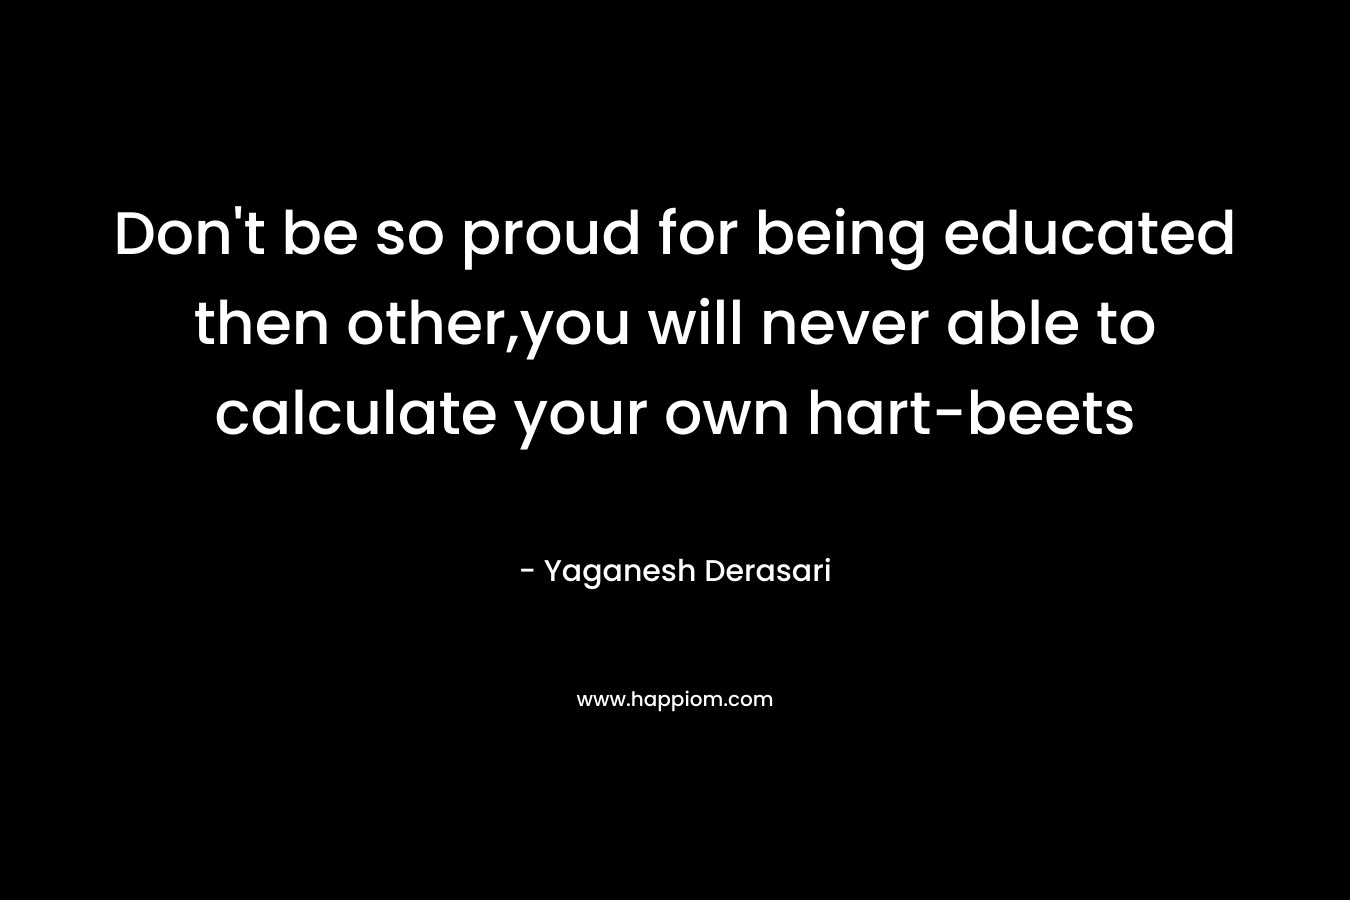 Don’t be so proud for being educated then other,you will never able to calculate your own hart-beets – Yaganesh Derasari